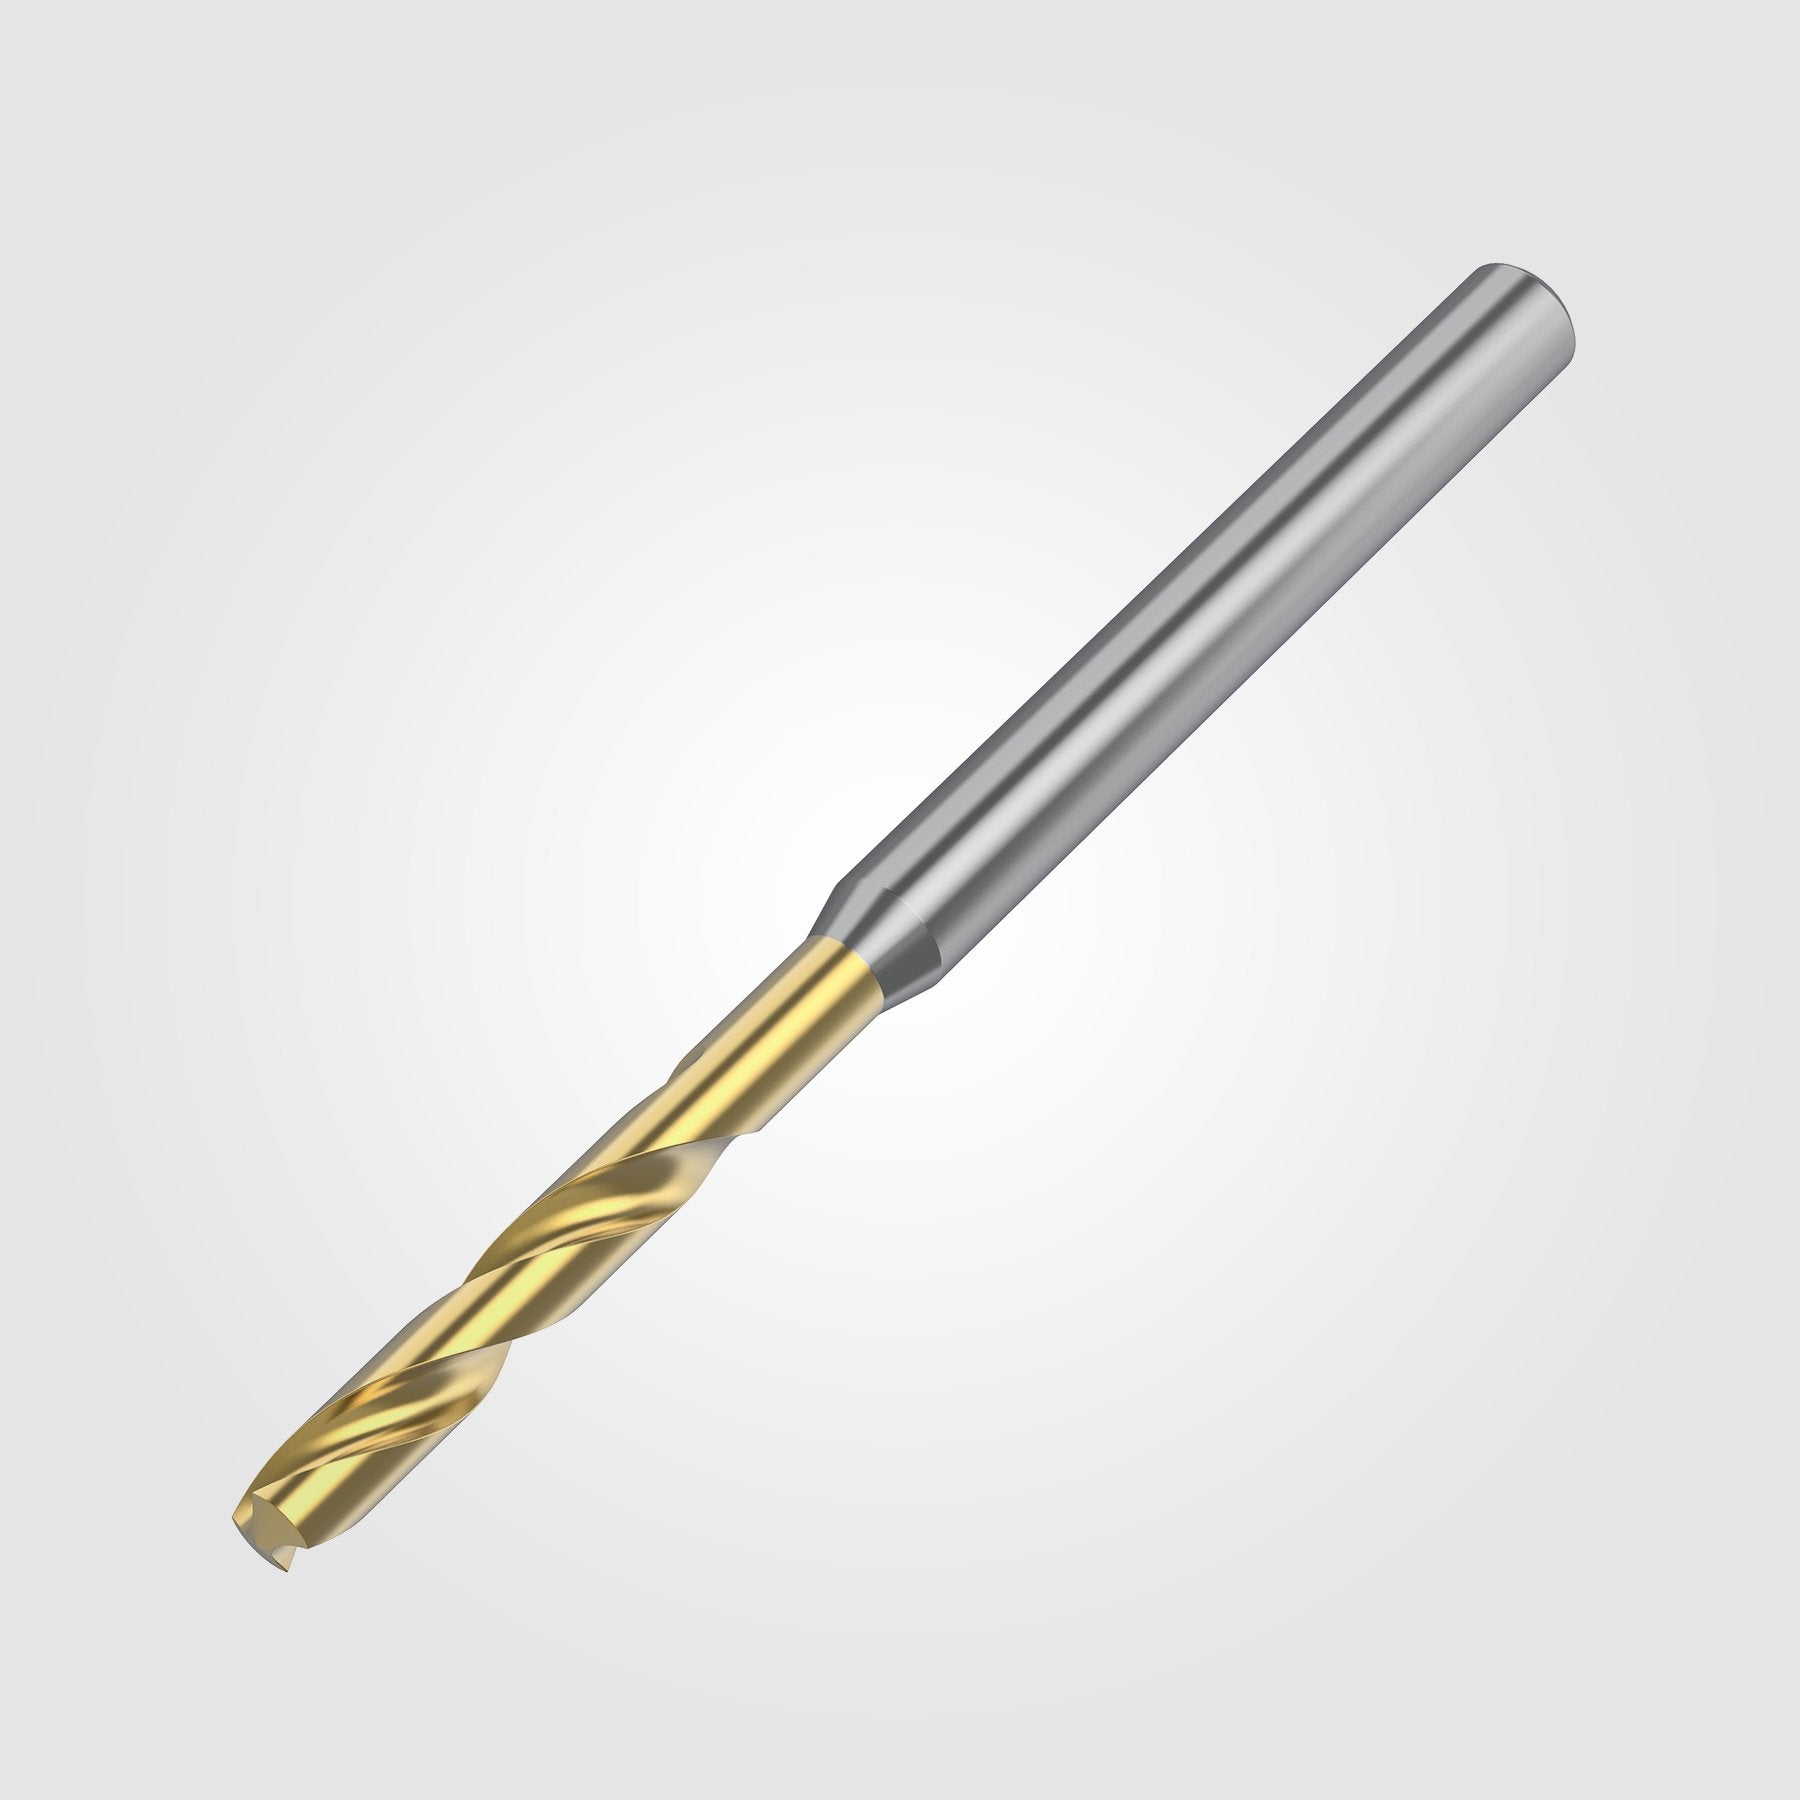 GOdrill (THROUGH COOLANT) | 2.6mm / .1024" / 3xD | SOLID CARBIDE DRILL | 4148849